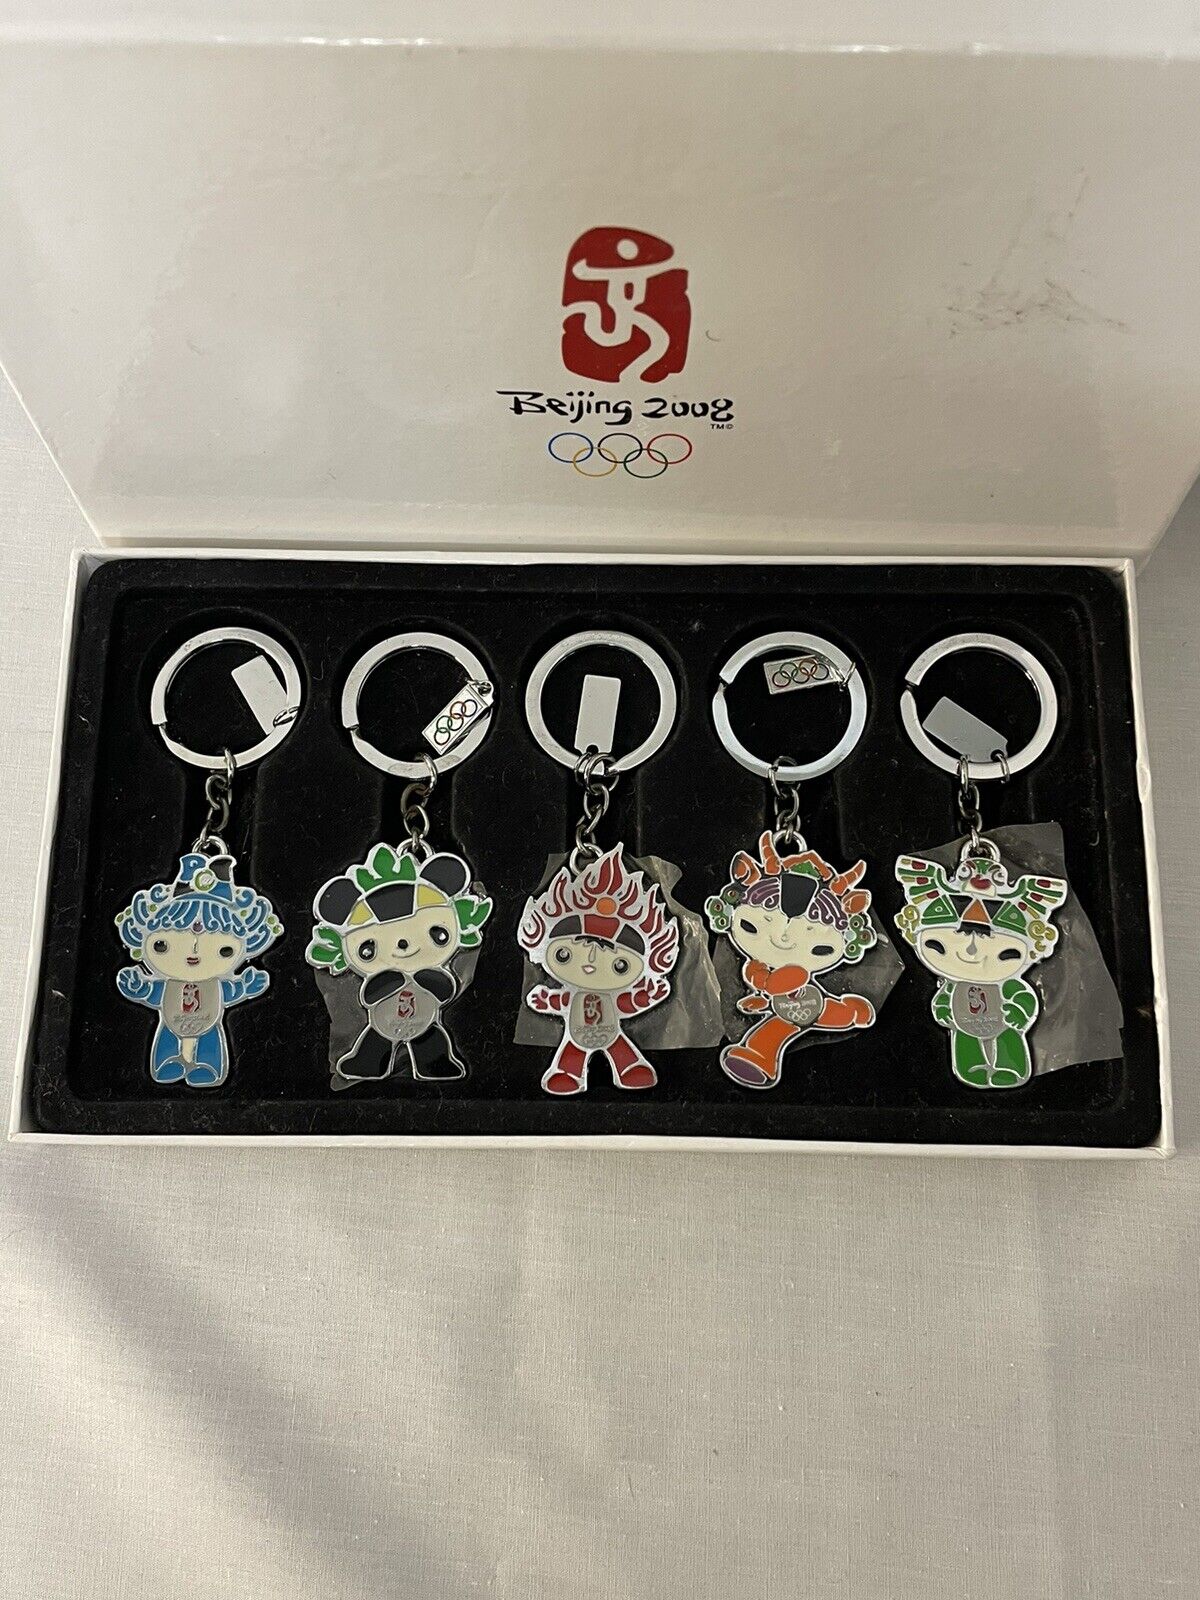 BEIJING 2008 SUMMER OLYMPIC GAMES CHINA OFFICIAL MASCOT 5 KEYCHAIN SET NEW BOX